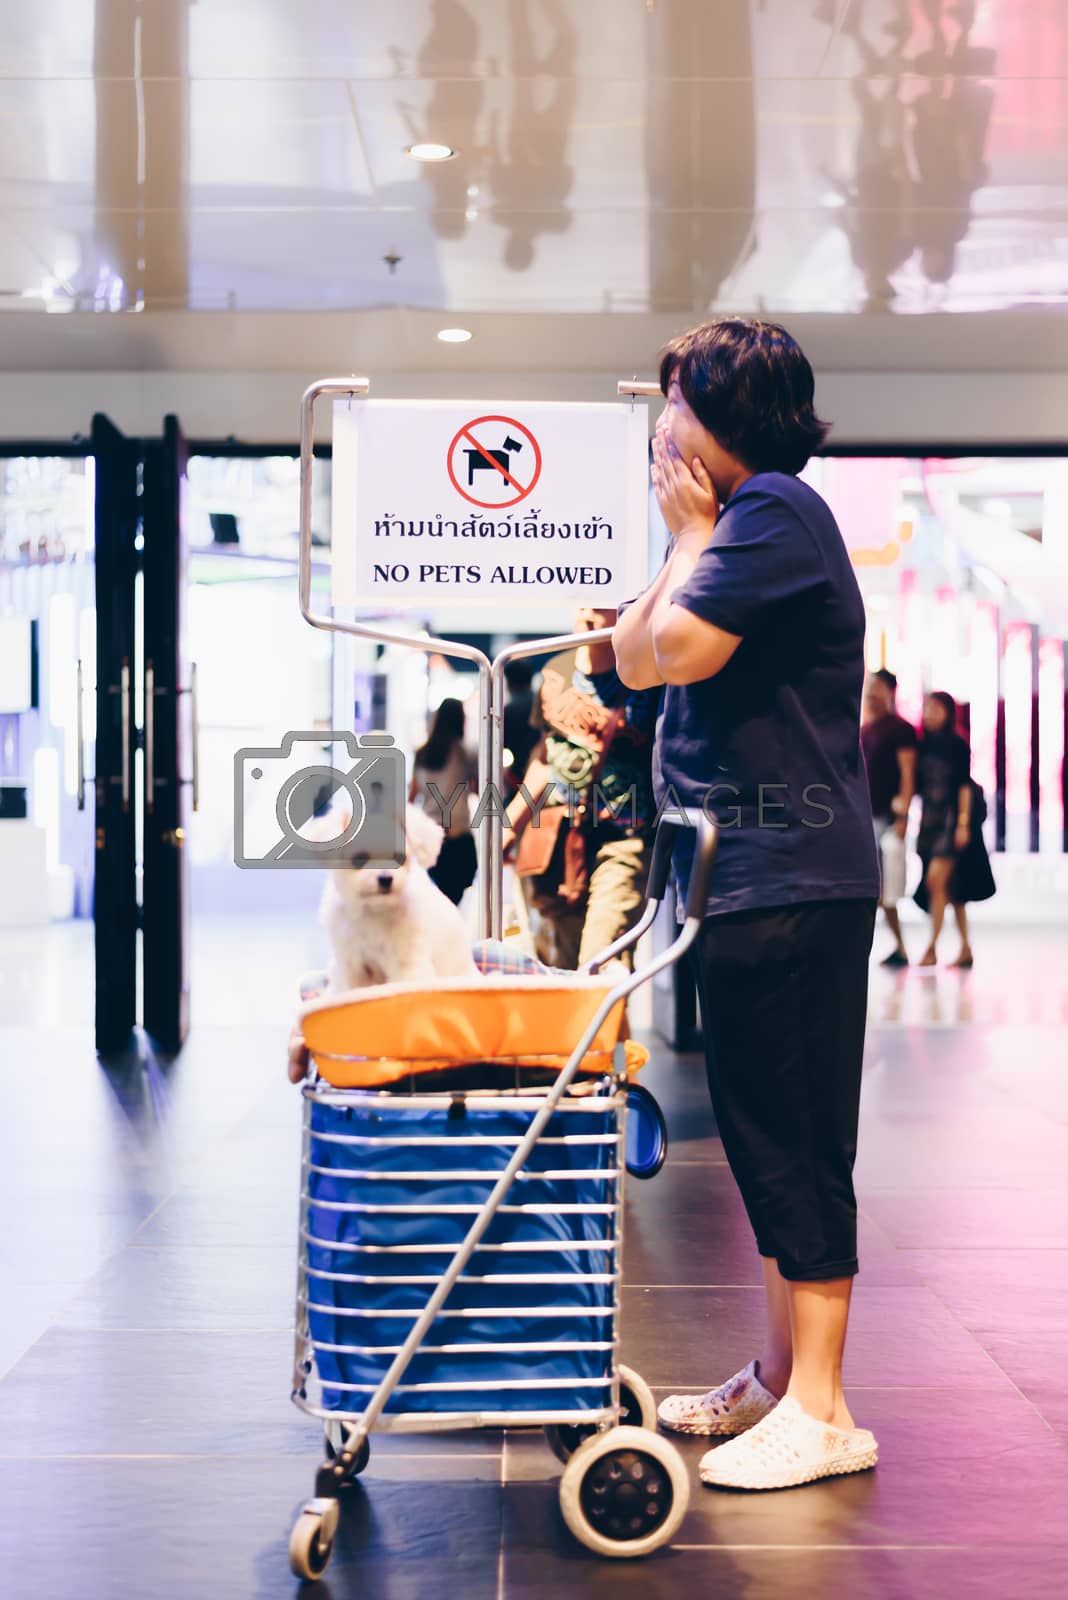 Bangkok, Thailand - July 1, 2017 : Unidentified asian woman feeling shocked when her and her pet (The dog) on shopping cart found warning sign No Pets Allowed at entrance door for exhibit hall or expo